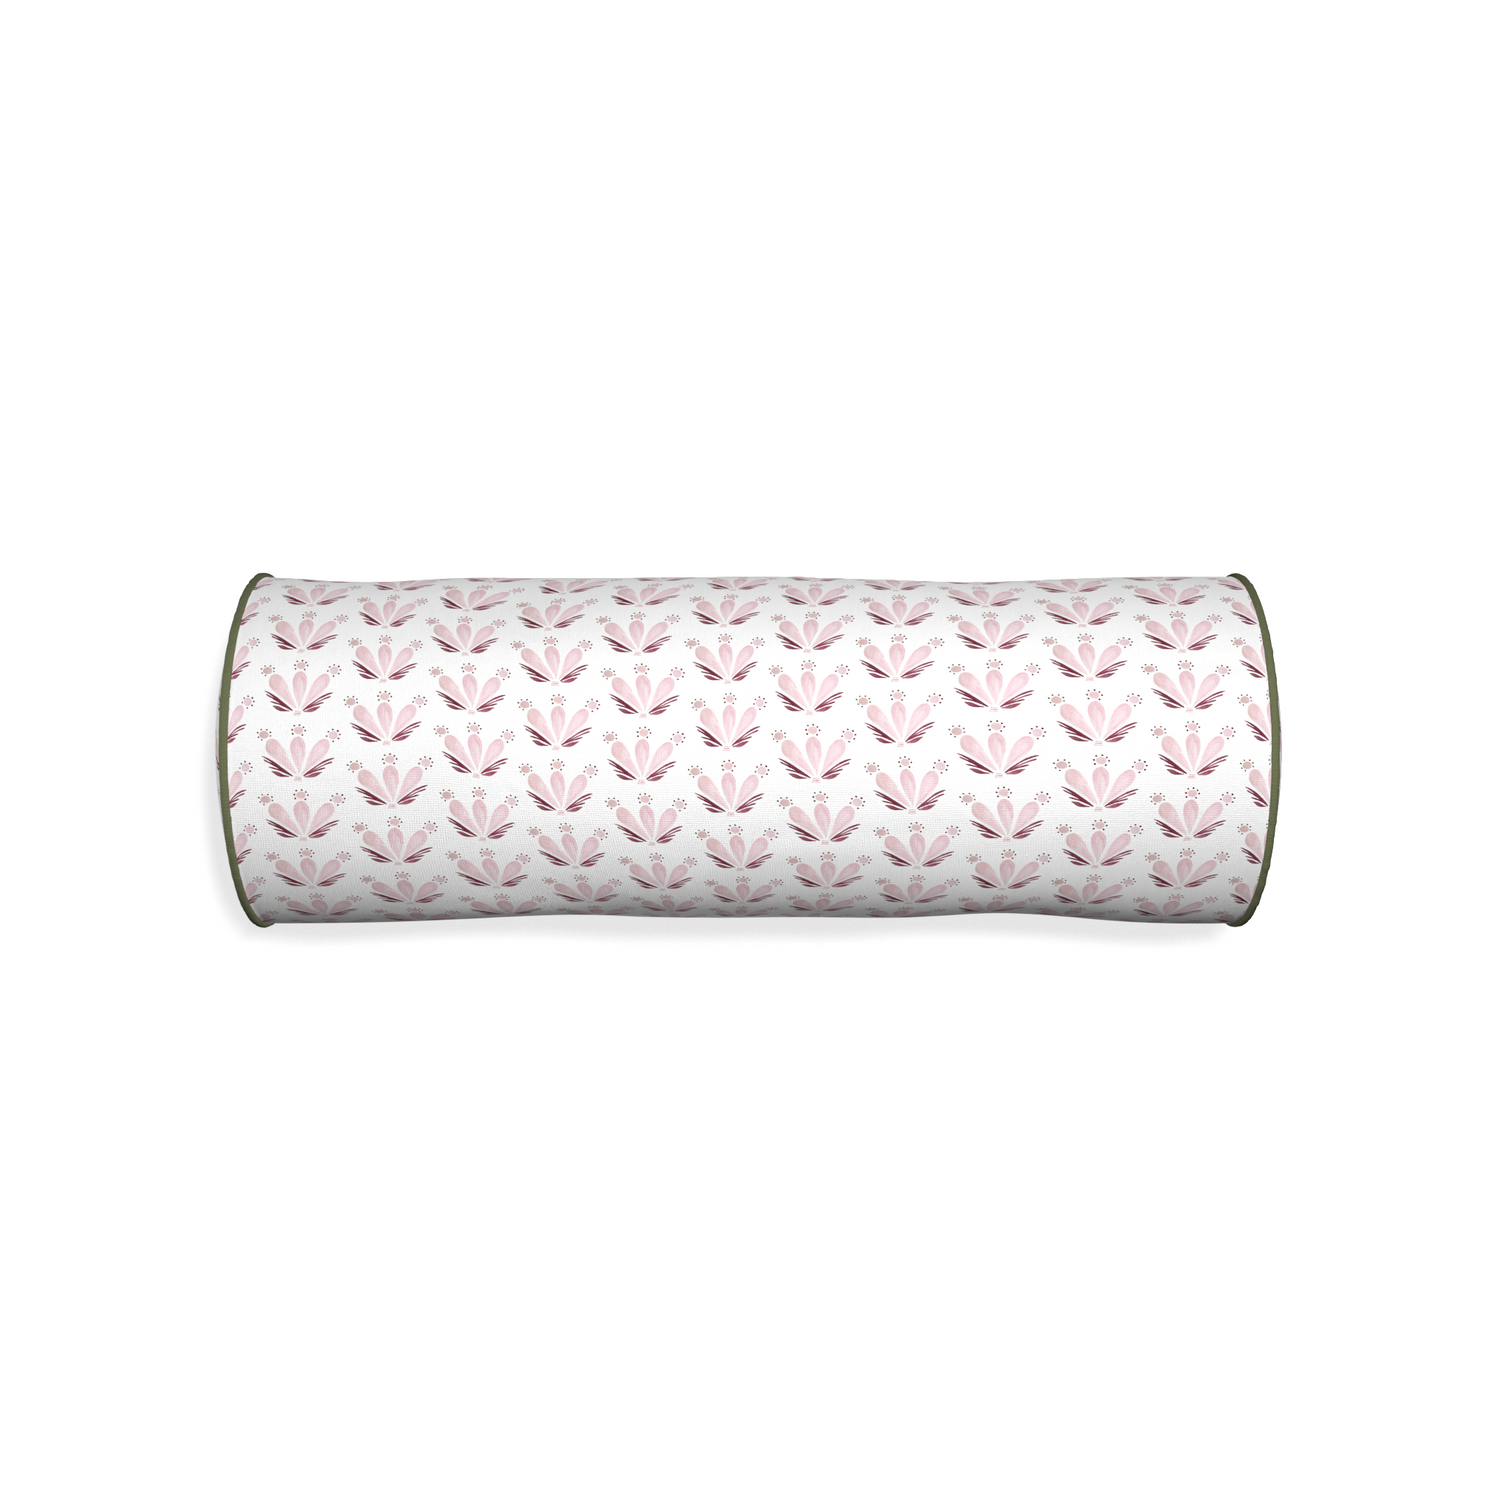 Bolster serena pink custom pillow with f piping on white background